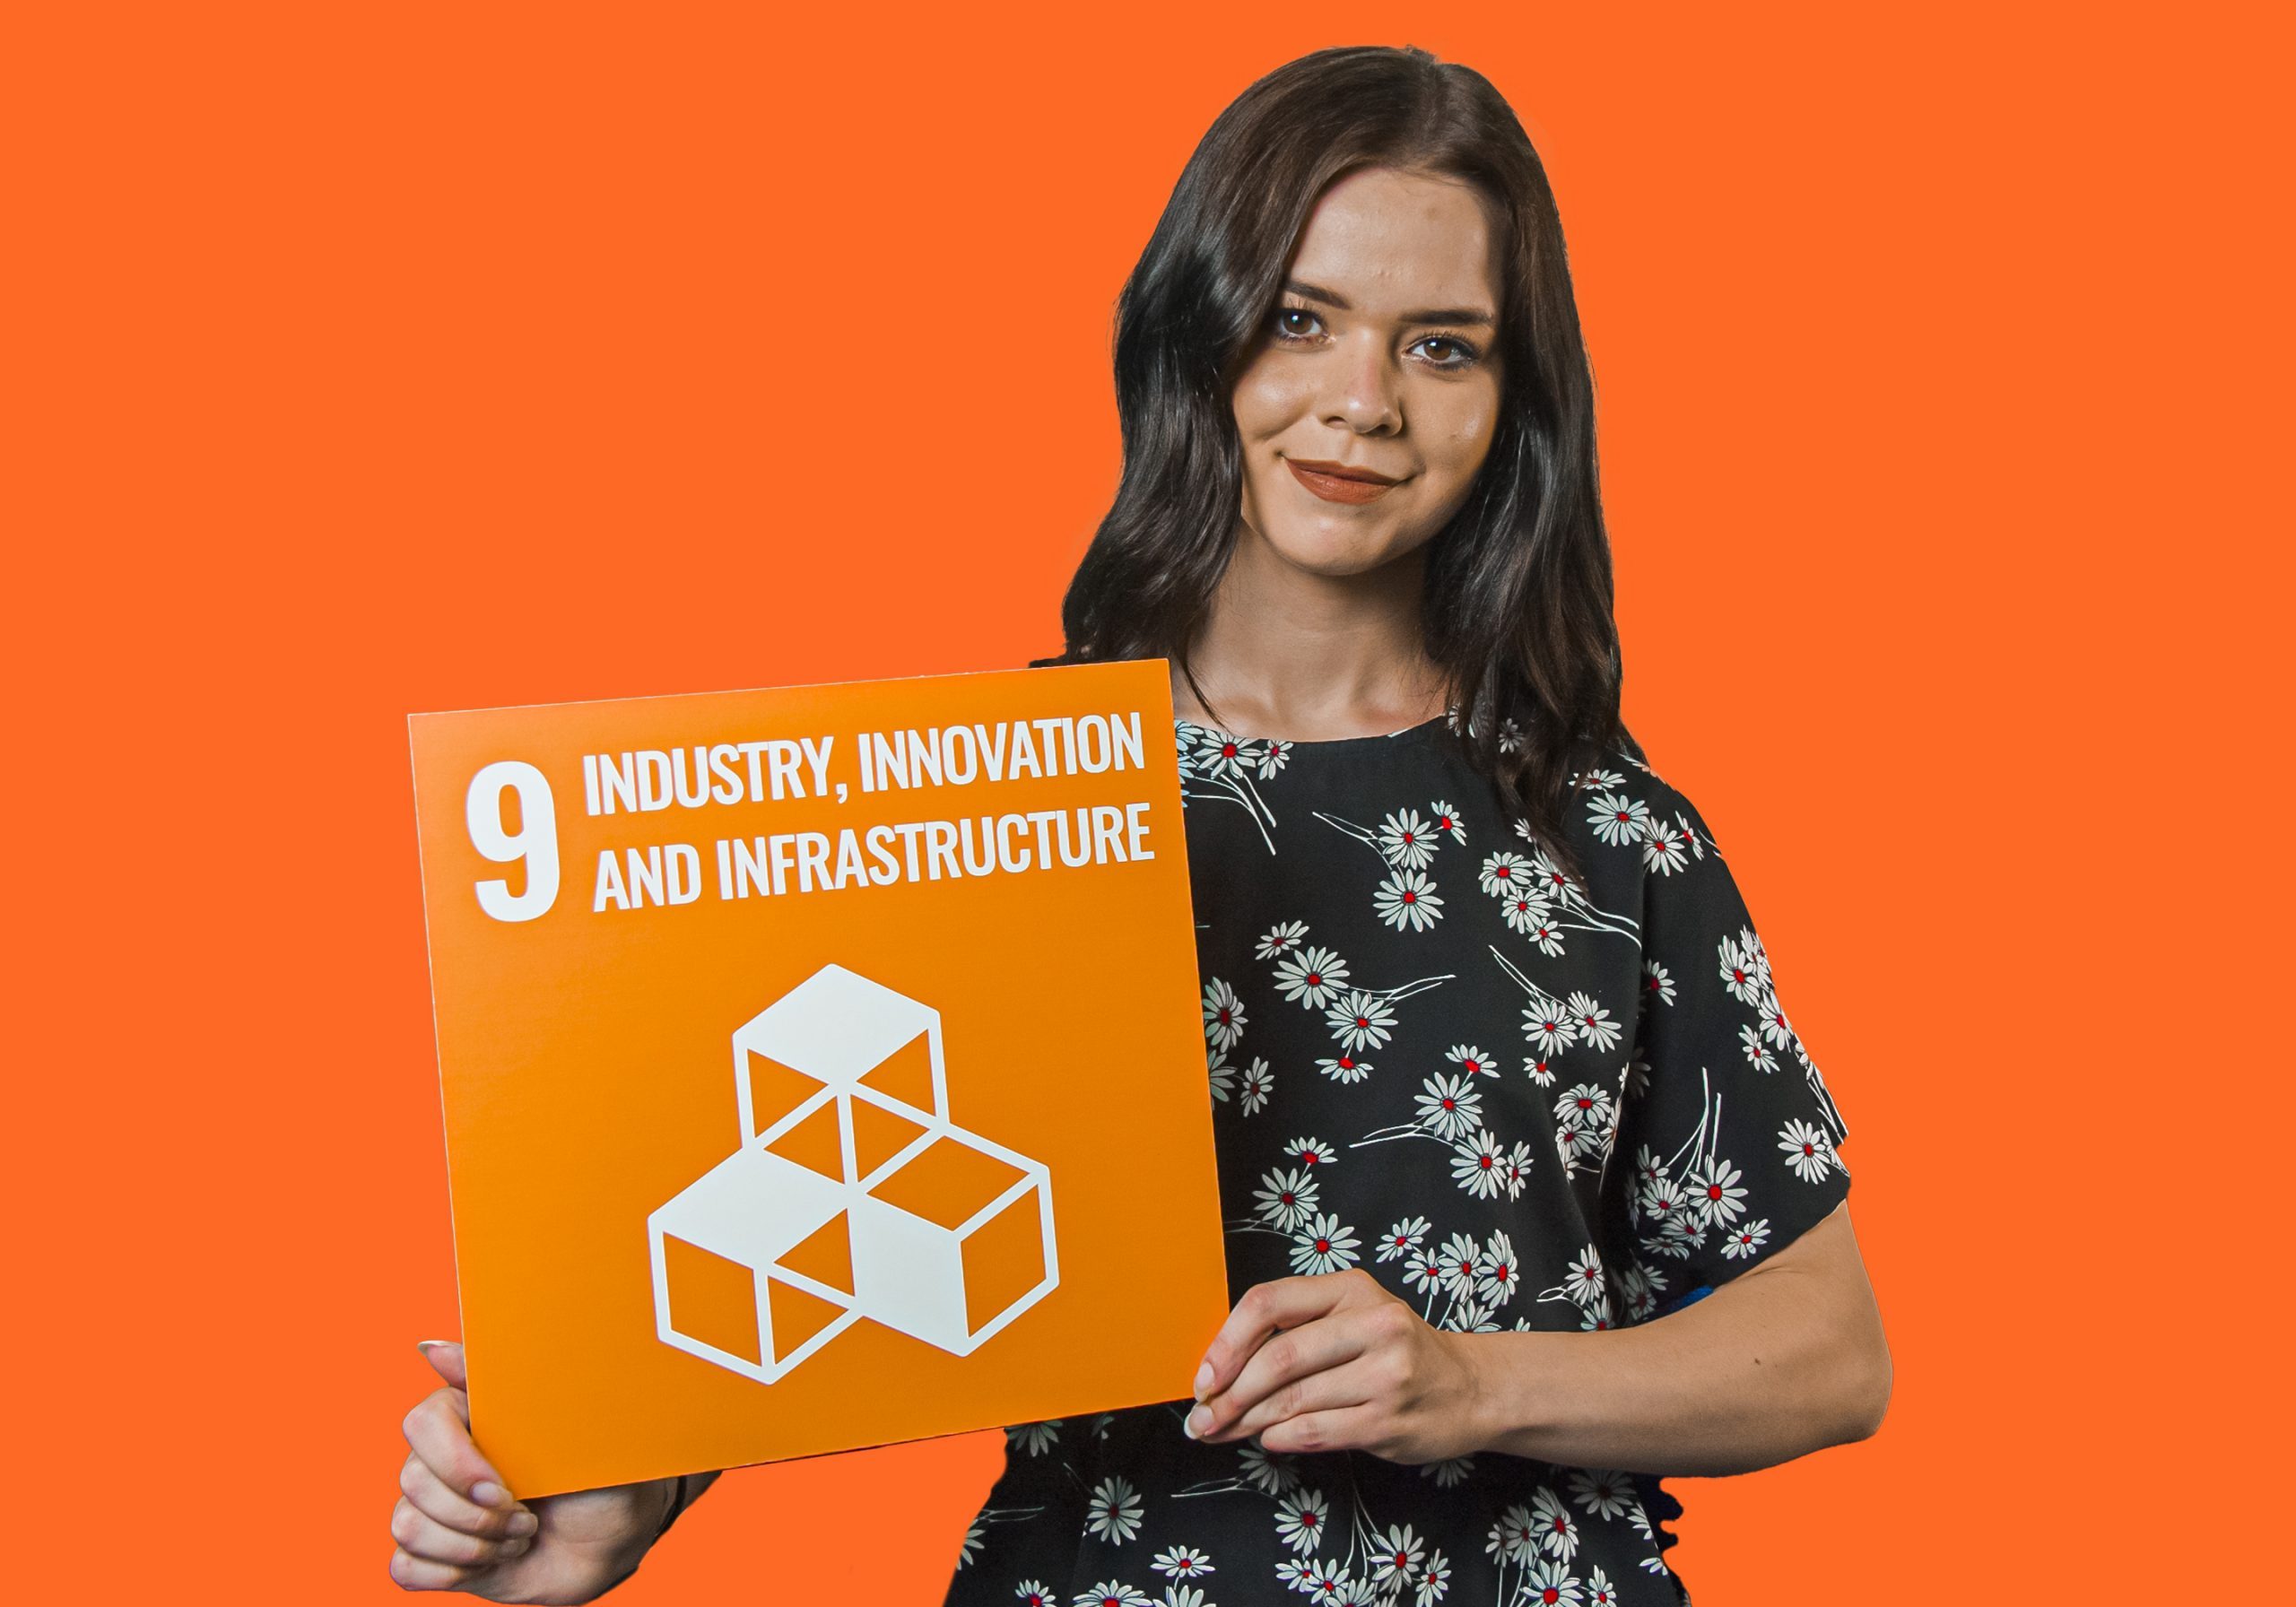 Woman holding up sign showing Global Sustainable Development Goal 9, industry, innovation and infrastructure.